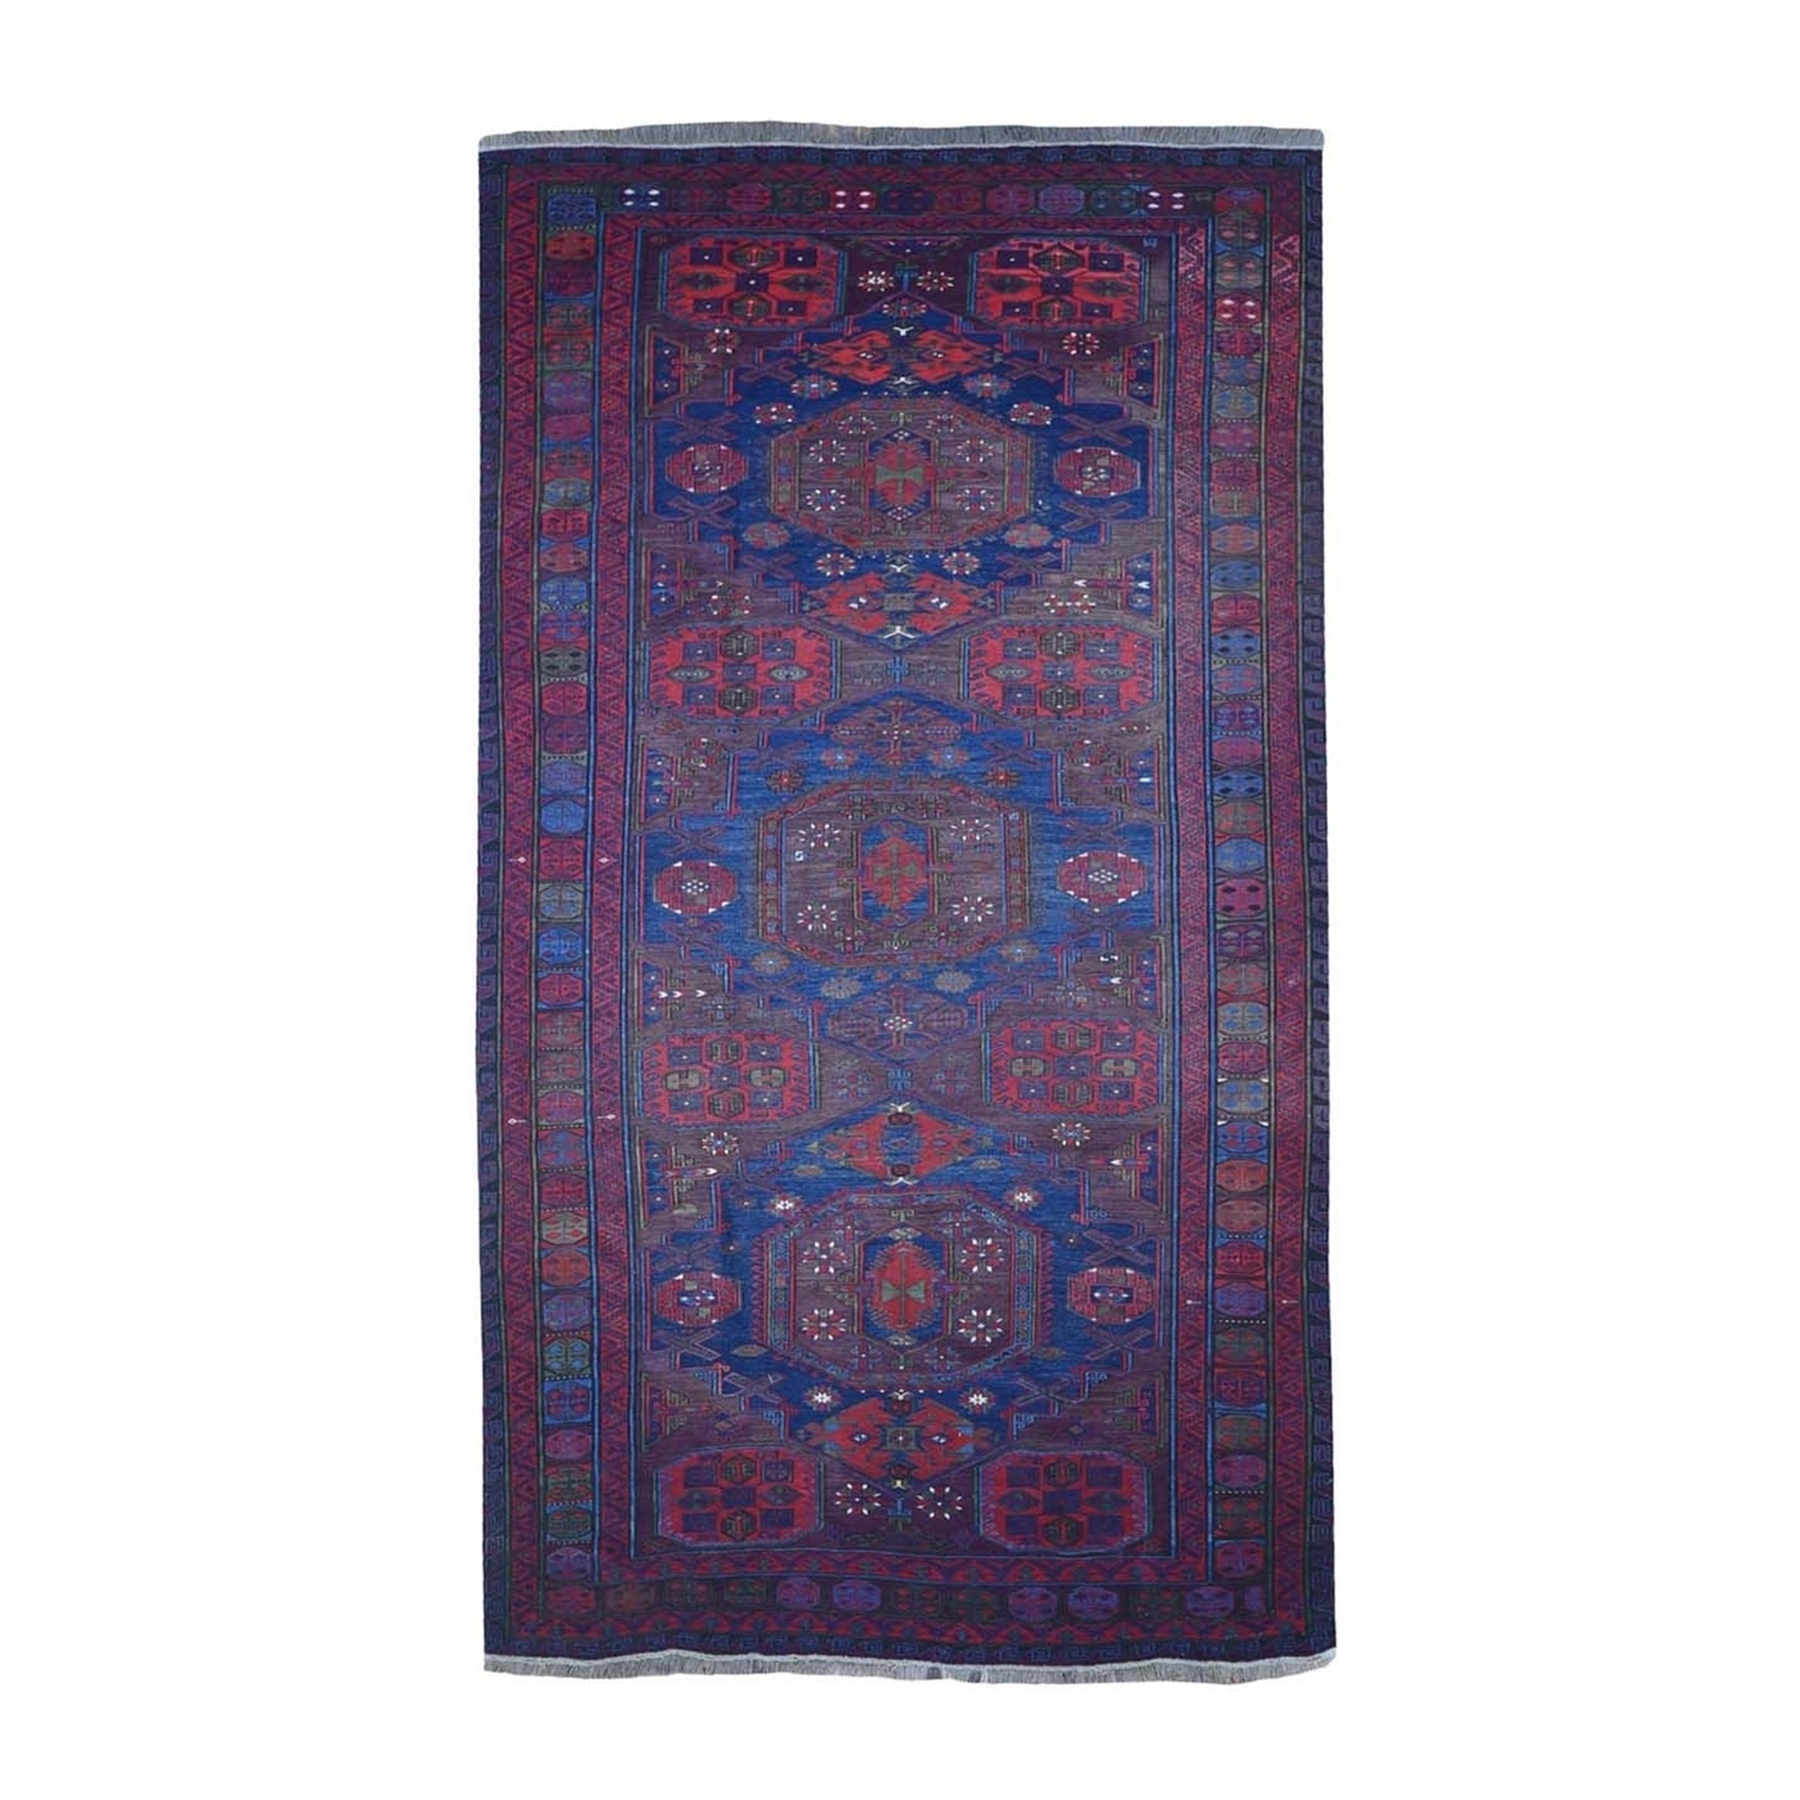 Antique Collection Hand Knotted Purple Rug No: 1132786